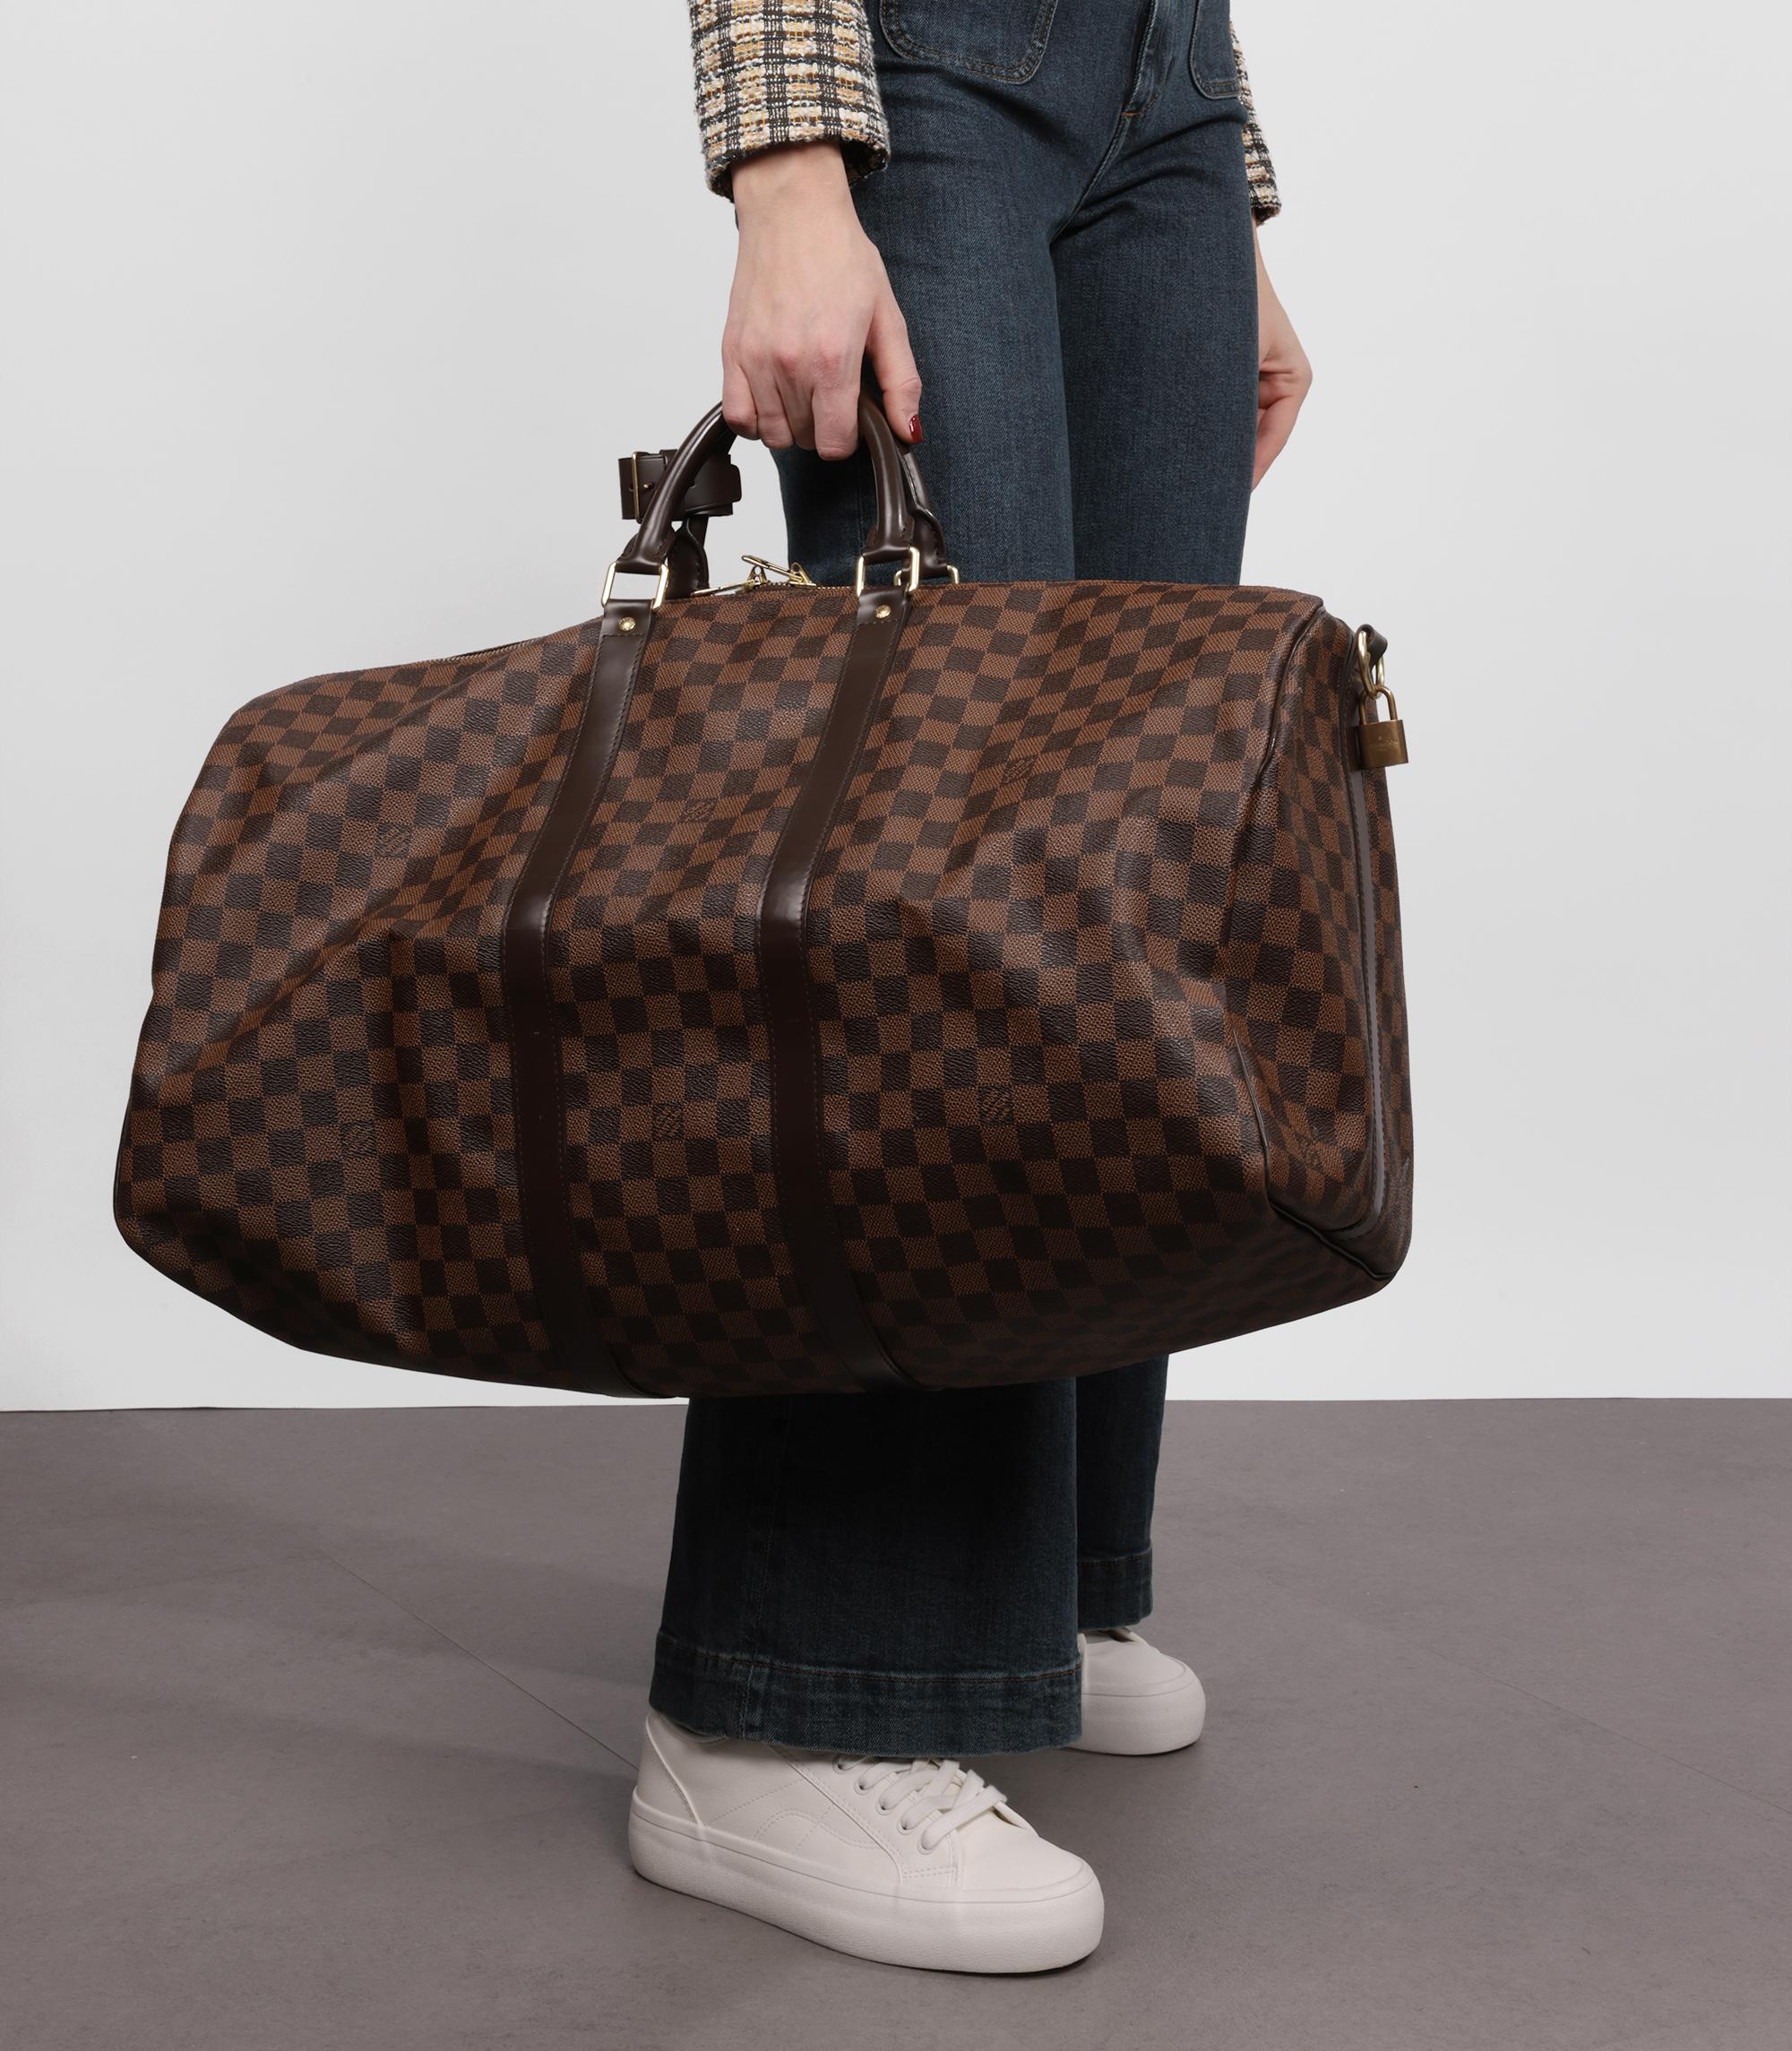 Louis Vuitton Damier Ebene Coated Canvas & Brown Calfskin Leather Keepall 55 Bandoulière

Brand- Louis Vuitton
Model- Keepall 55 Bandoulière
Product Type- Travel
Serial Number- MB****
Age- Circa 2015
Accompanied By- Louis Vuitton Dust Bag, Padlock,